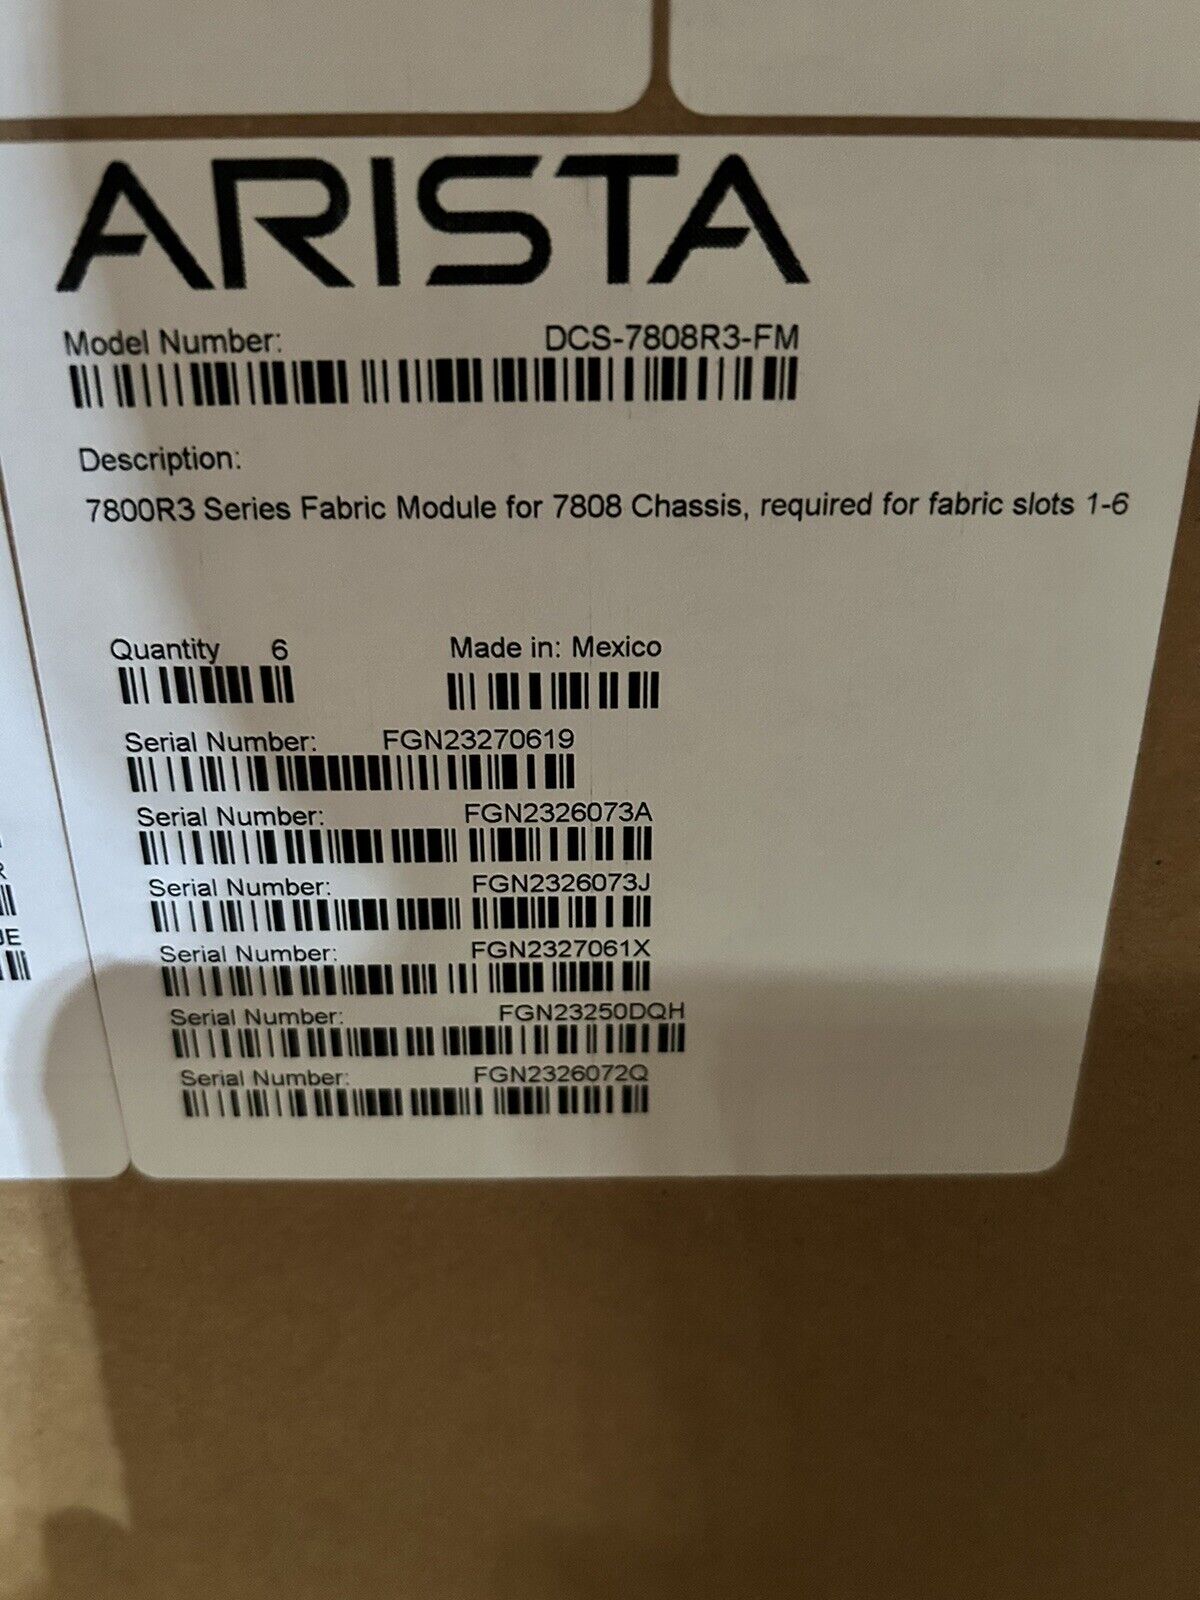 Arista DCS-7808R3-FM ASY-53061-117 A0 Fabric Module for 7808 Chassis NEW PULL